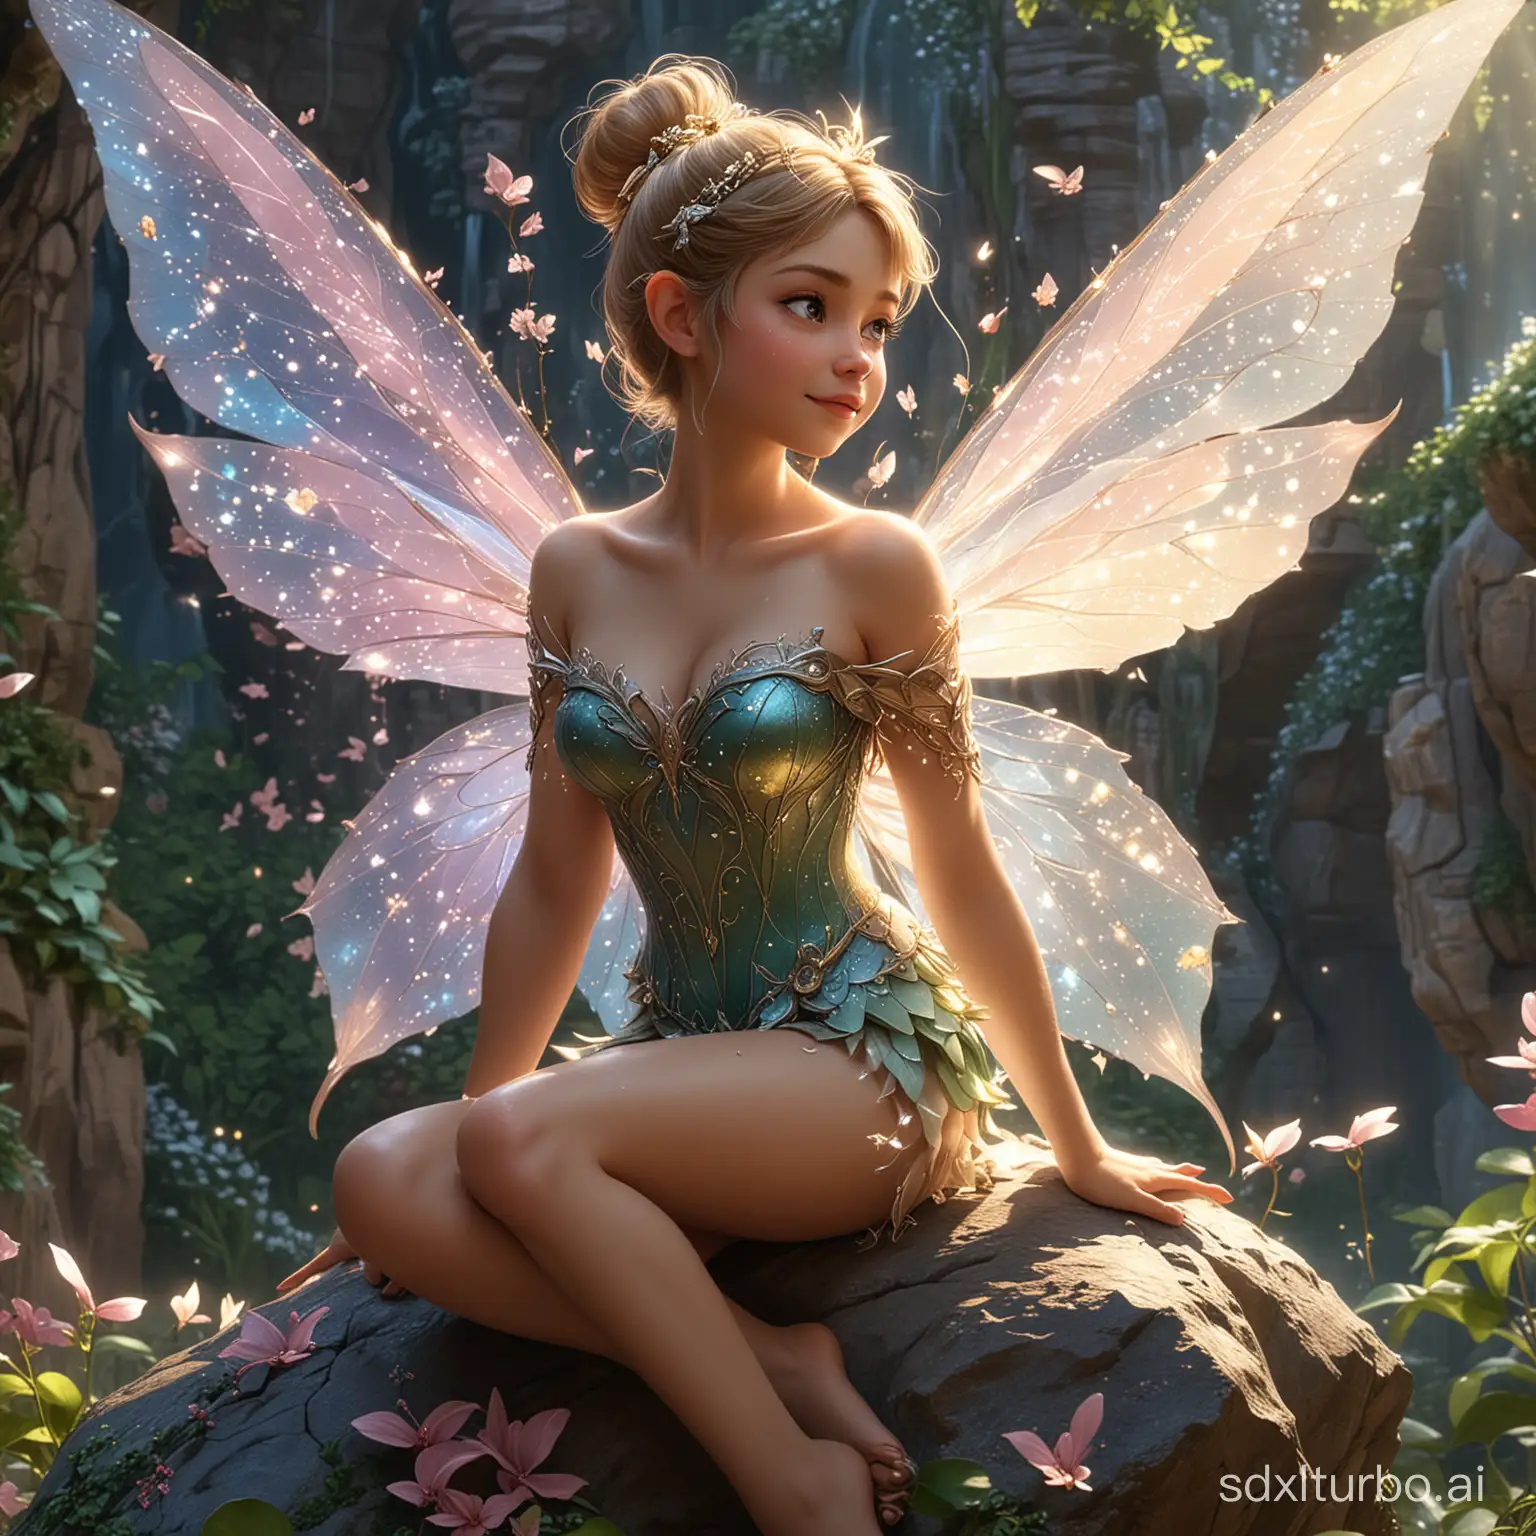  a beautiful fairy sitting on top of a rock, trending on cg society, highly intricate wings!, pixie, intricate body, tinkerbell, the non-binary deity of spring, she has a glow coming from her, beautiful painting of a tall, amazing wallpaper, glistening body, art in the style of disney, super detailed and realistic 